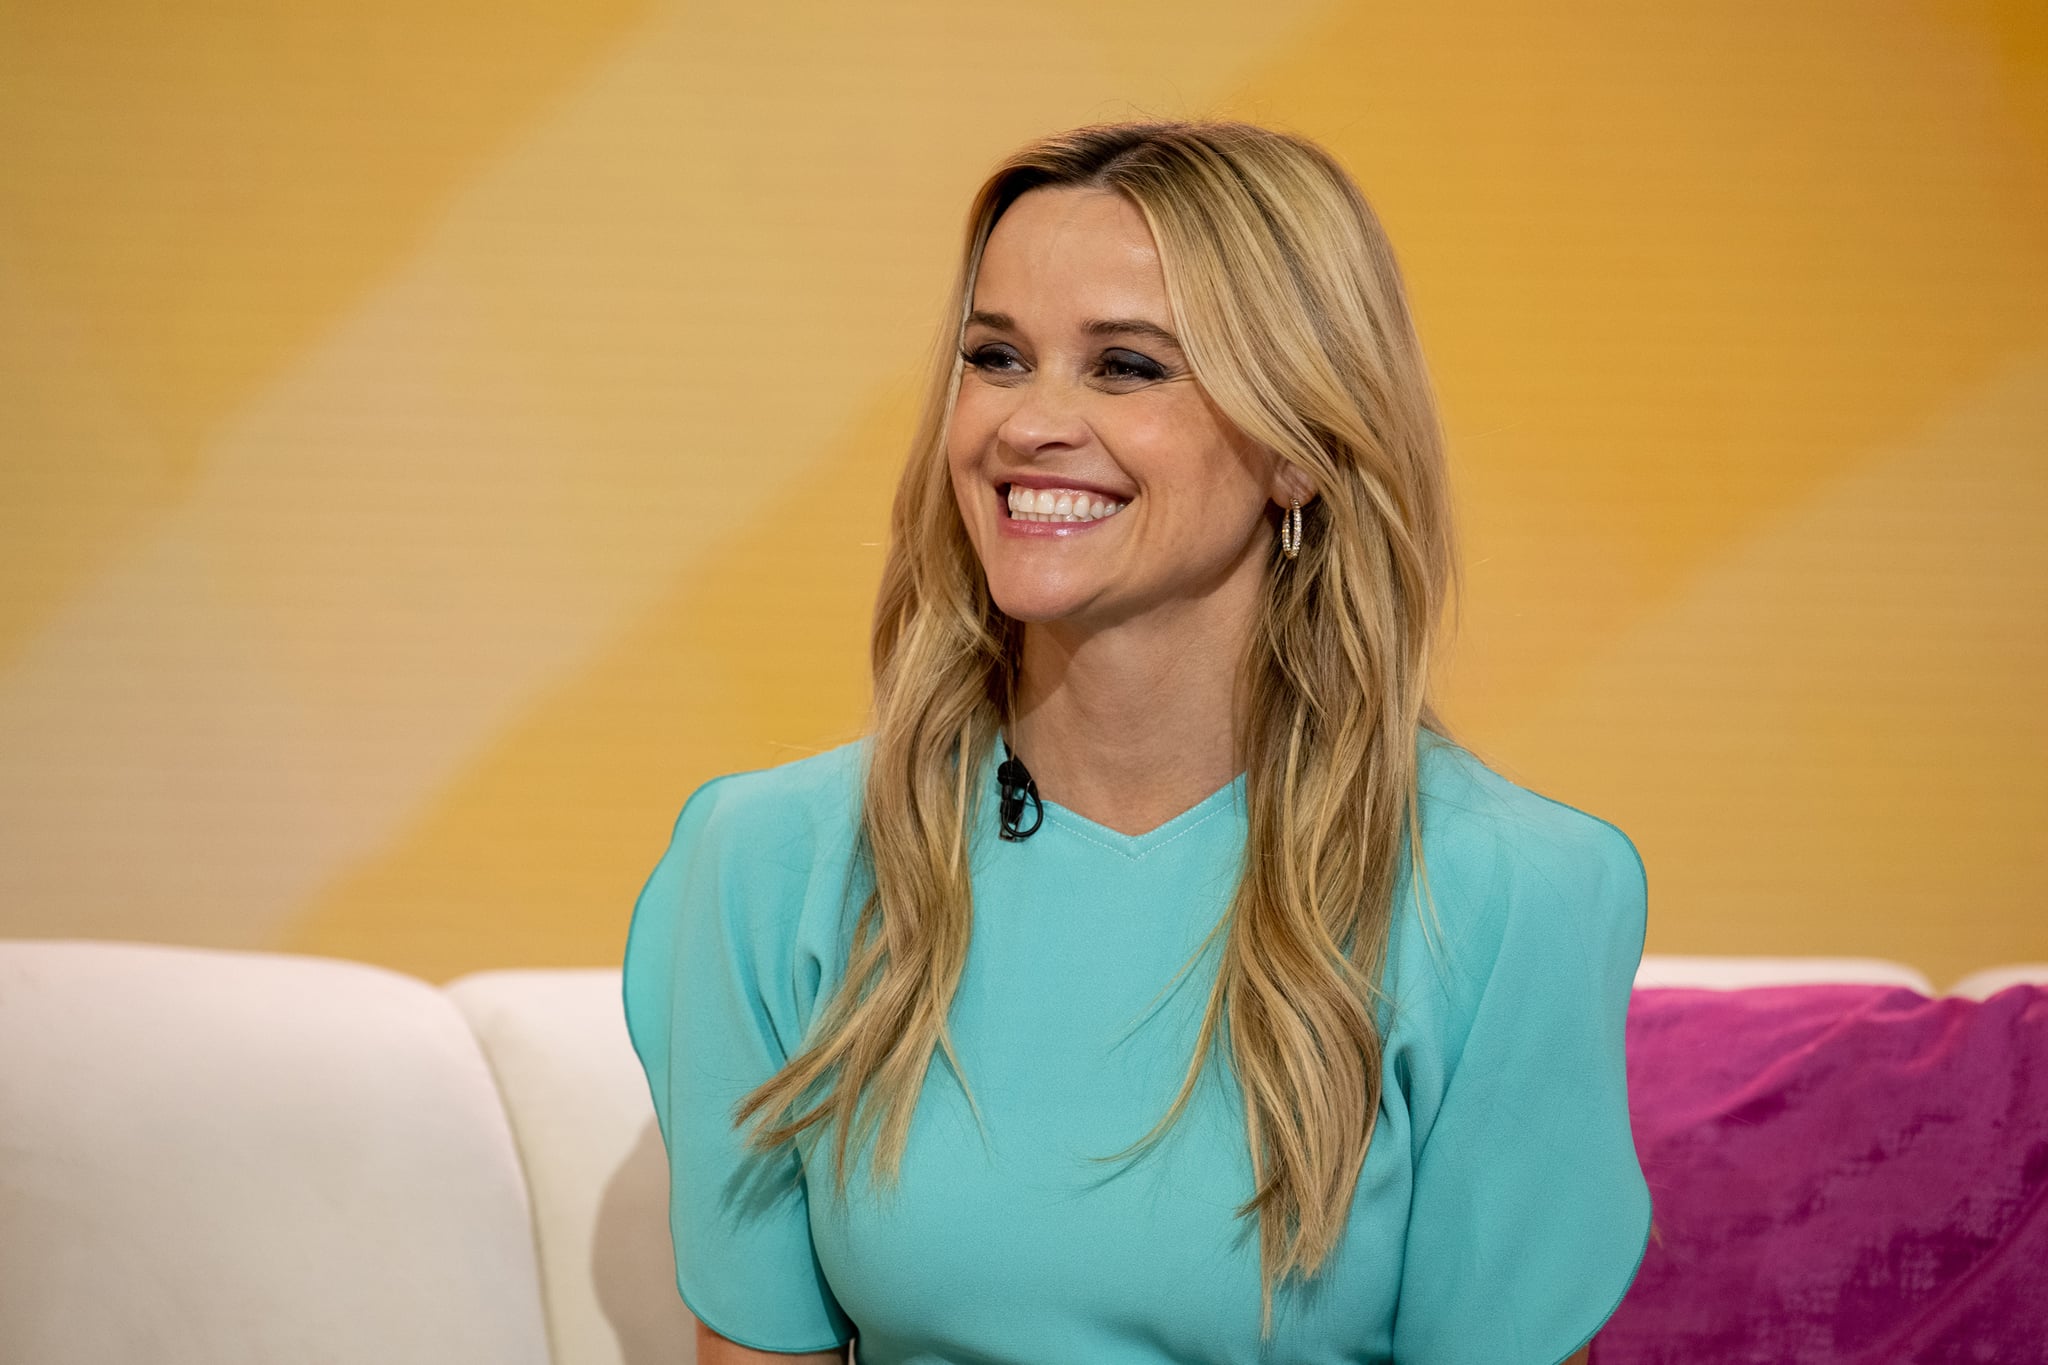 TODAY -- Pictured: Reece Witherspoon on Monday, February 6, 2023 -- (Photo by: Nathan Congleton/NBC via Getty Images)